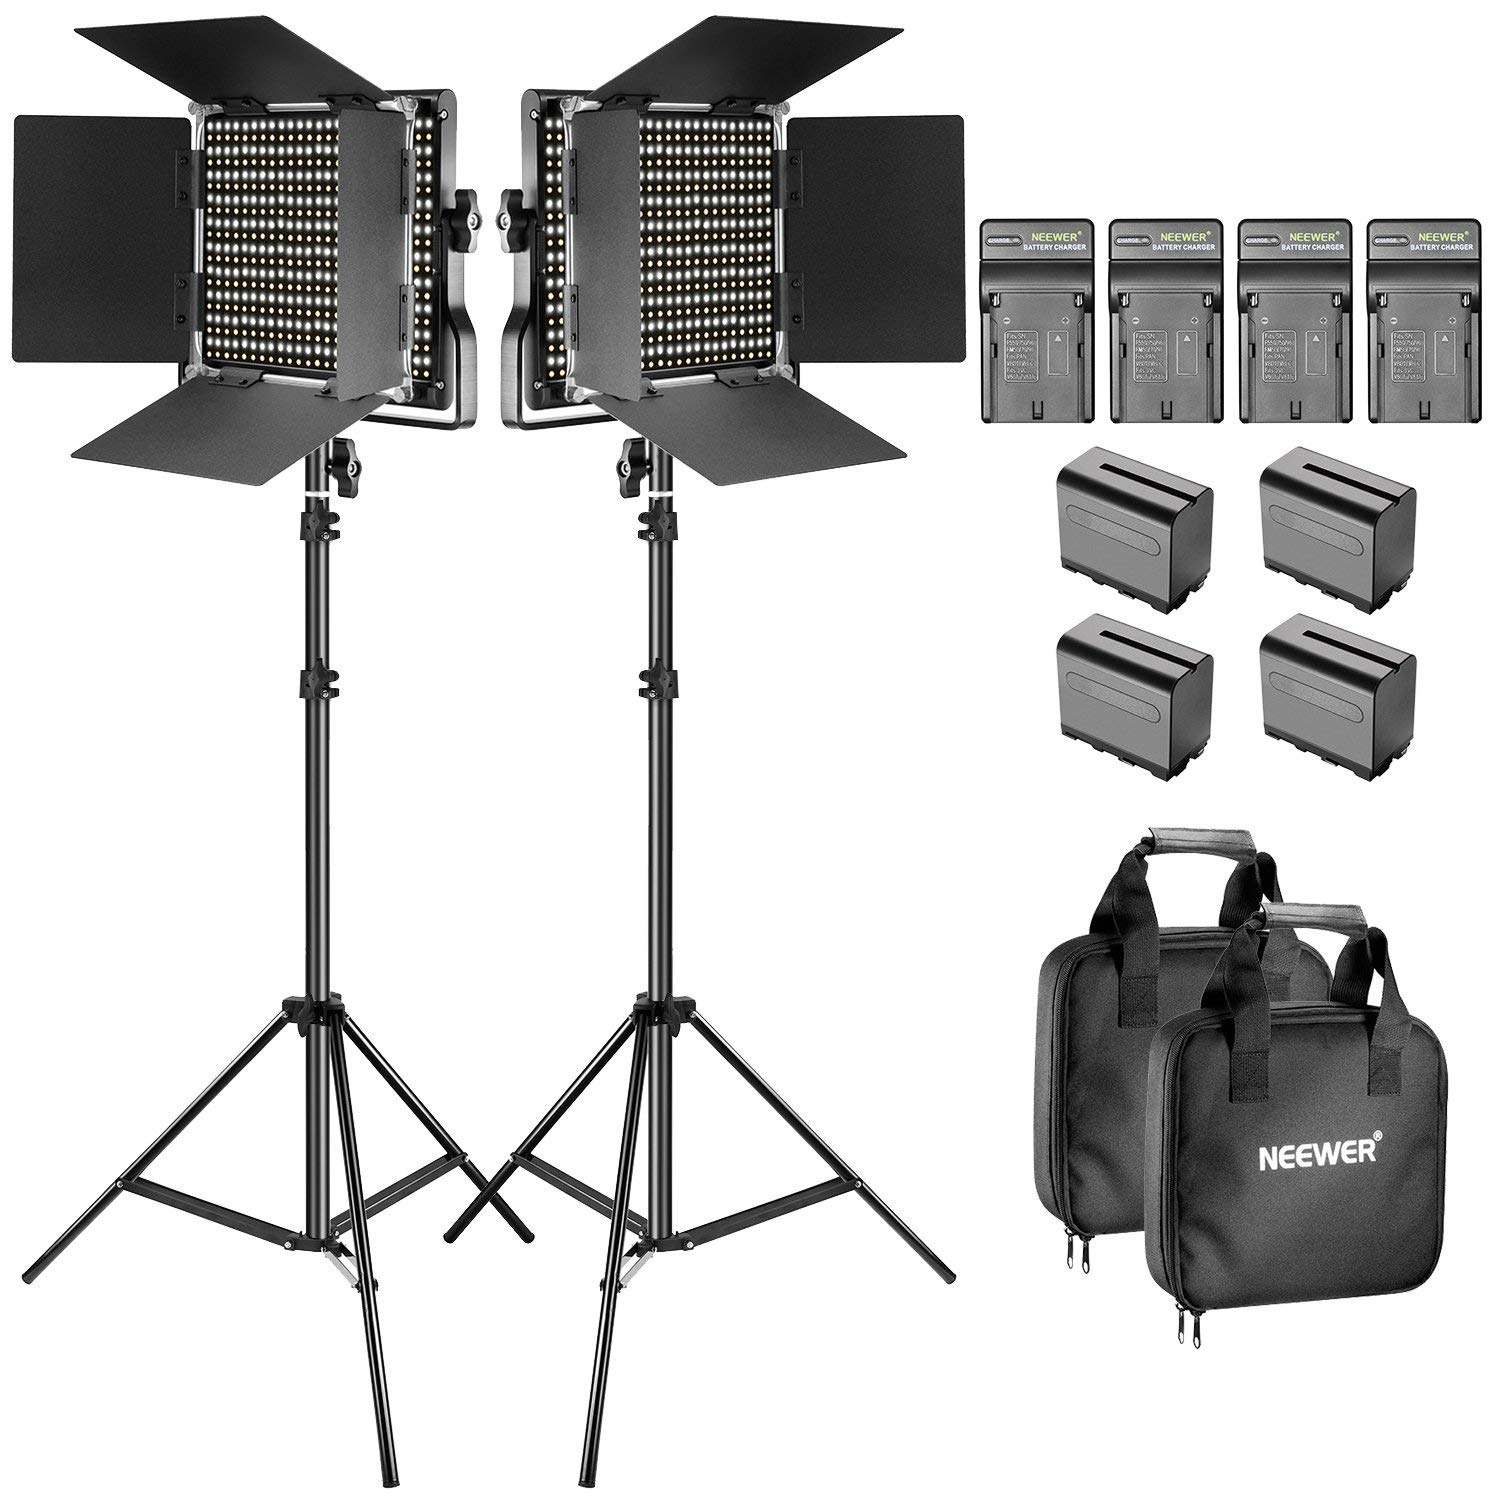 Neewer Bi-color LED Video Light and Stand Kit with Battery and Charger-660 LED with U Bracket and Barndoor(3200-5600K,CRI 96+), 3-6.5 feet Adjustable Light Stand for Studio, YouTube Shooting (2 Pack).  Contents: 2 x 660 LED Video Light. 2 x Light Stand. 4 x Battery Charger. 4 x Battery. 2 x Power Adapter.  2 x US Plug. 2 x White Diffuser. 2 x Carrying Case